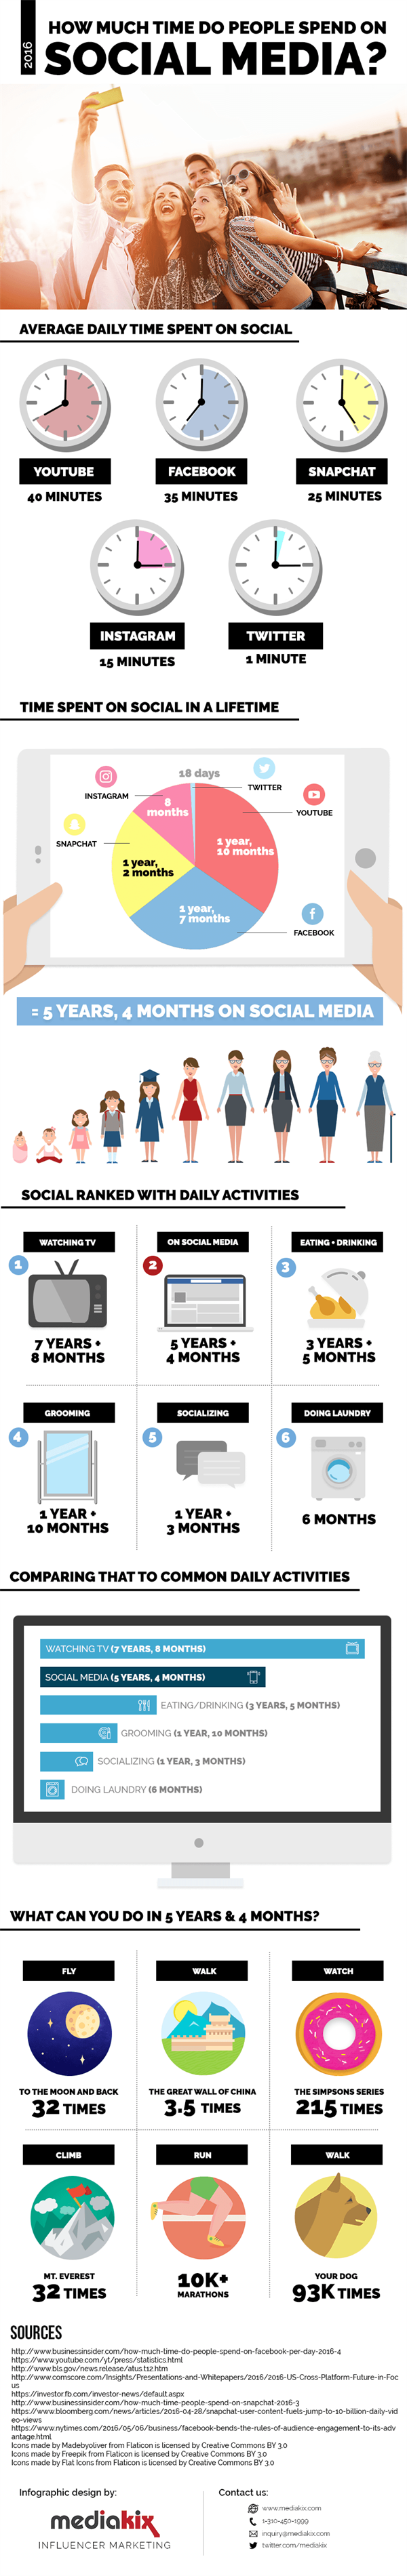 How-Much-Time-Is-Spent-On-Social-Media-REVISED